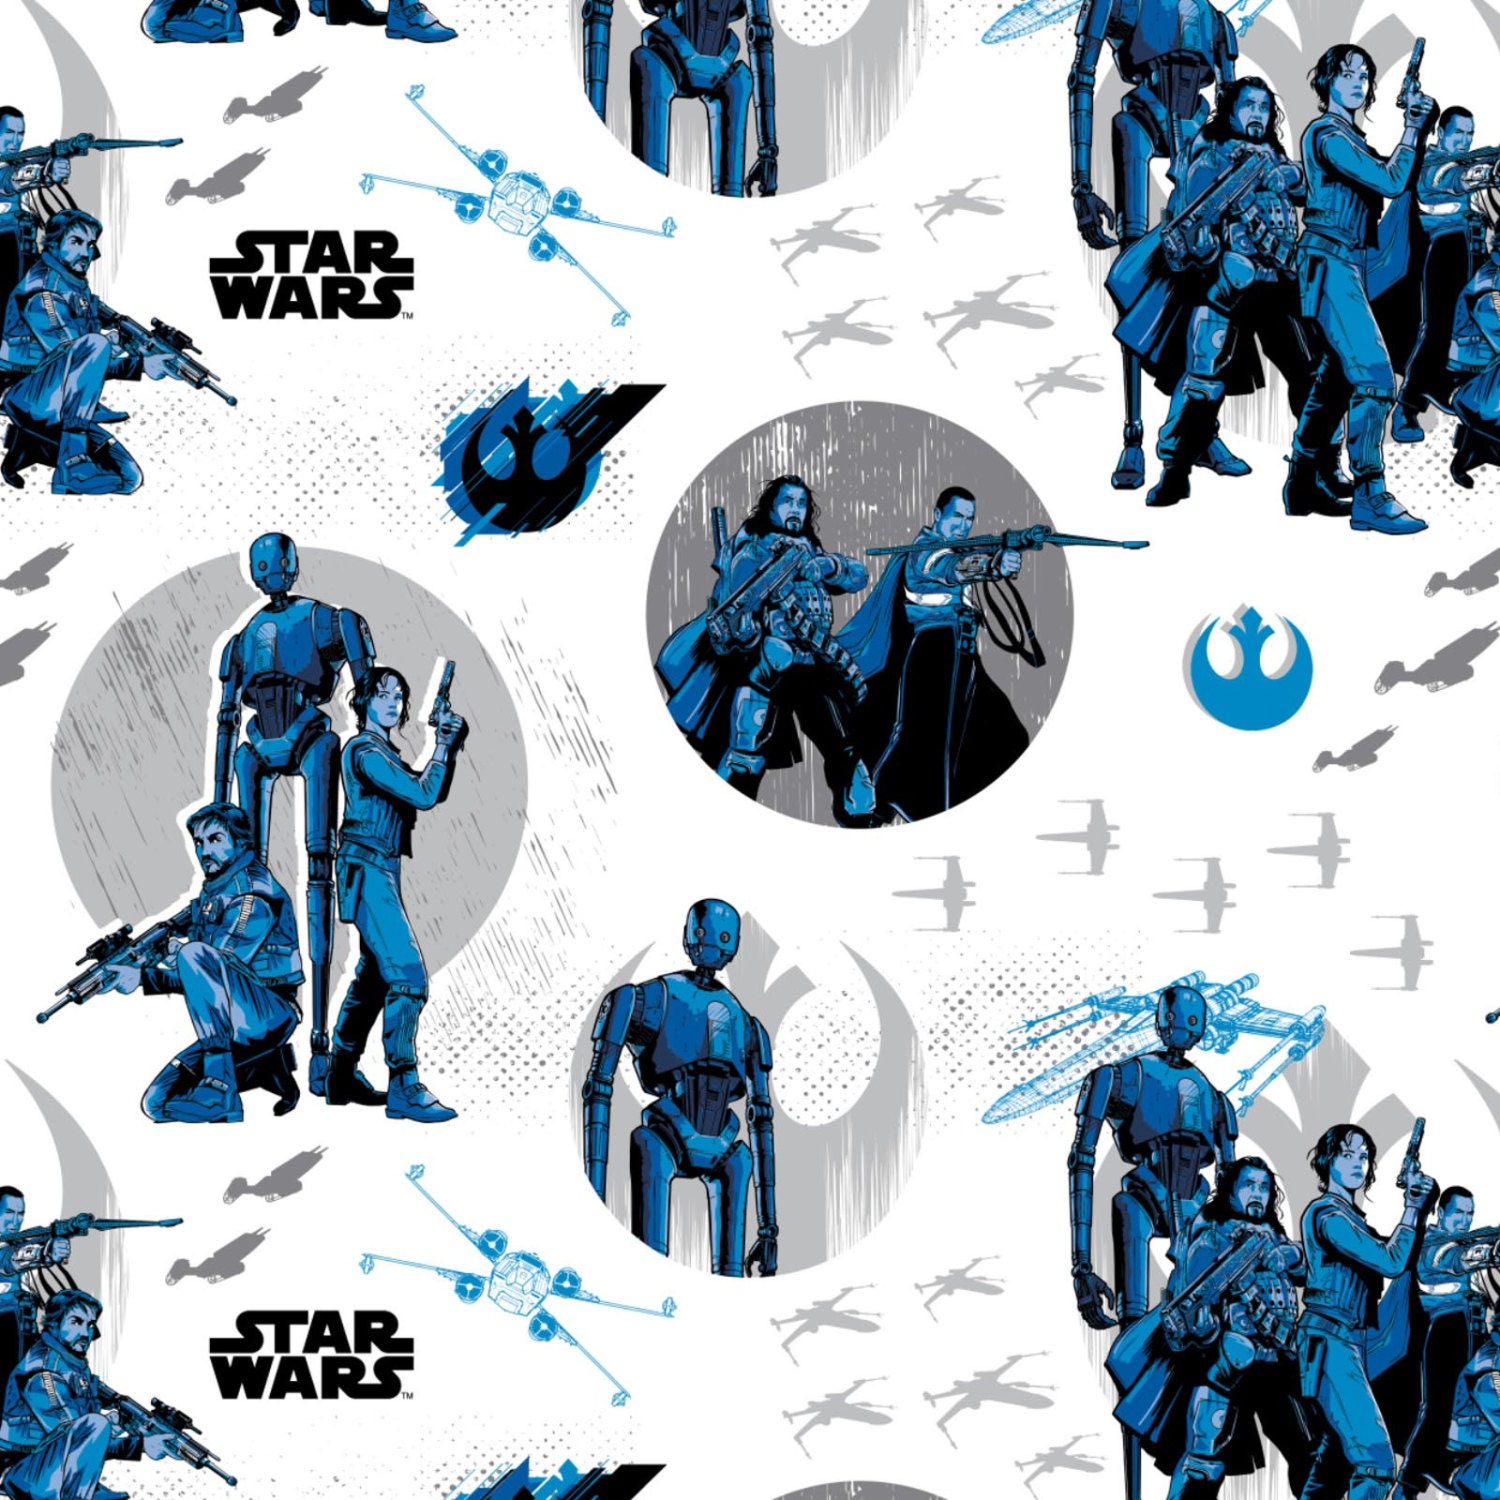 Camelot Star Wars Rogue One 7370101 1 White Rebels Cotton Fabric BTY 